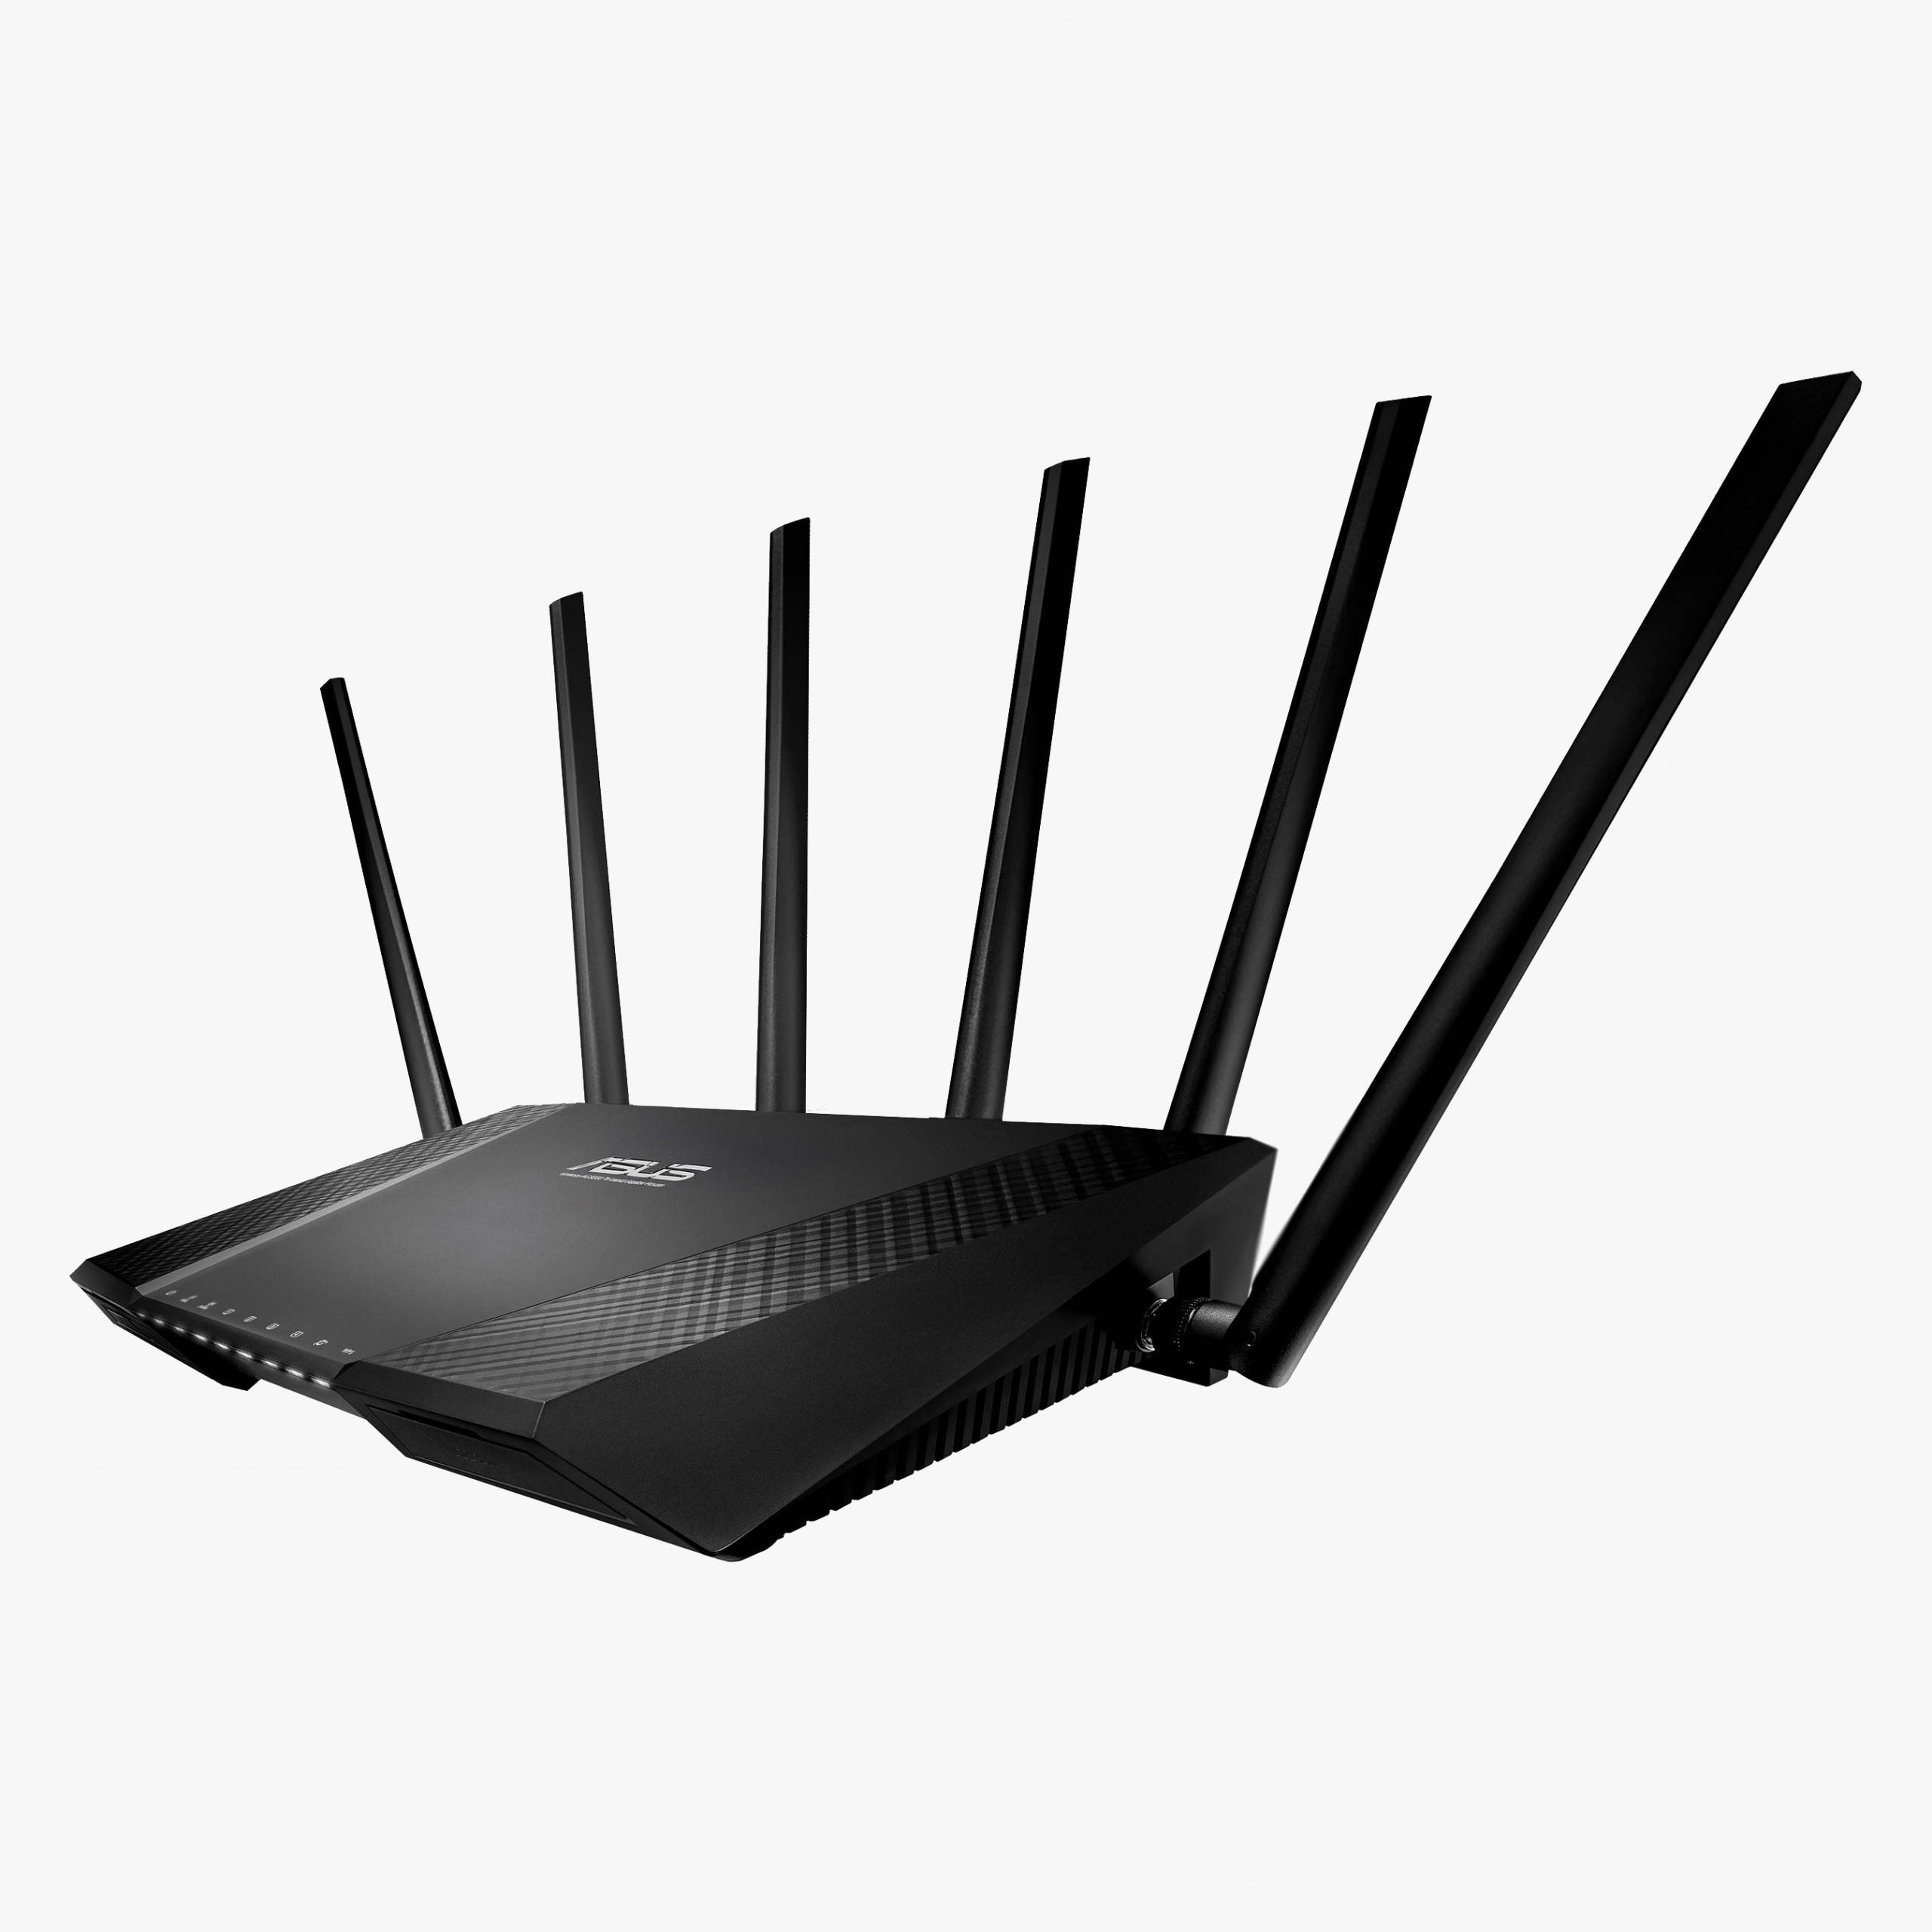 ASUS RT-AC3200 AC3200 Tri-Band Gigabit Wireless Router